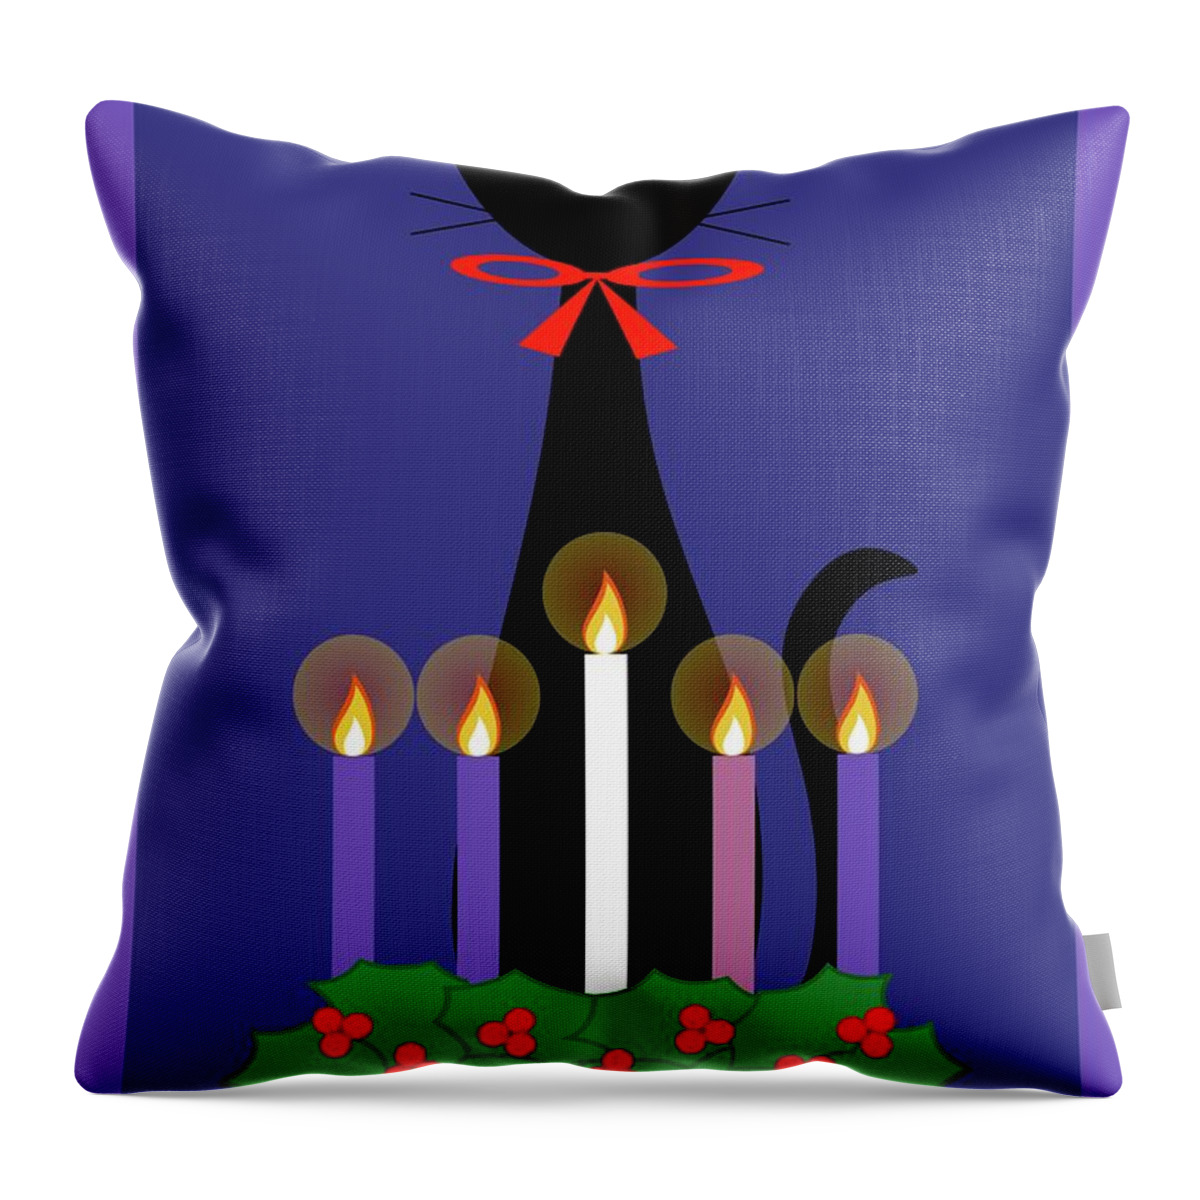 Christmas Throw Pillow featuring the digital art Black Cat with Christmas Advent Wreath by Donna Mibus